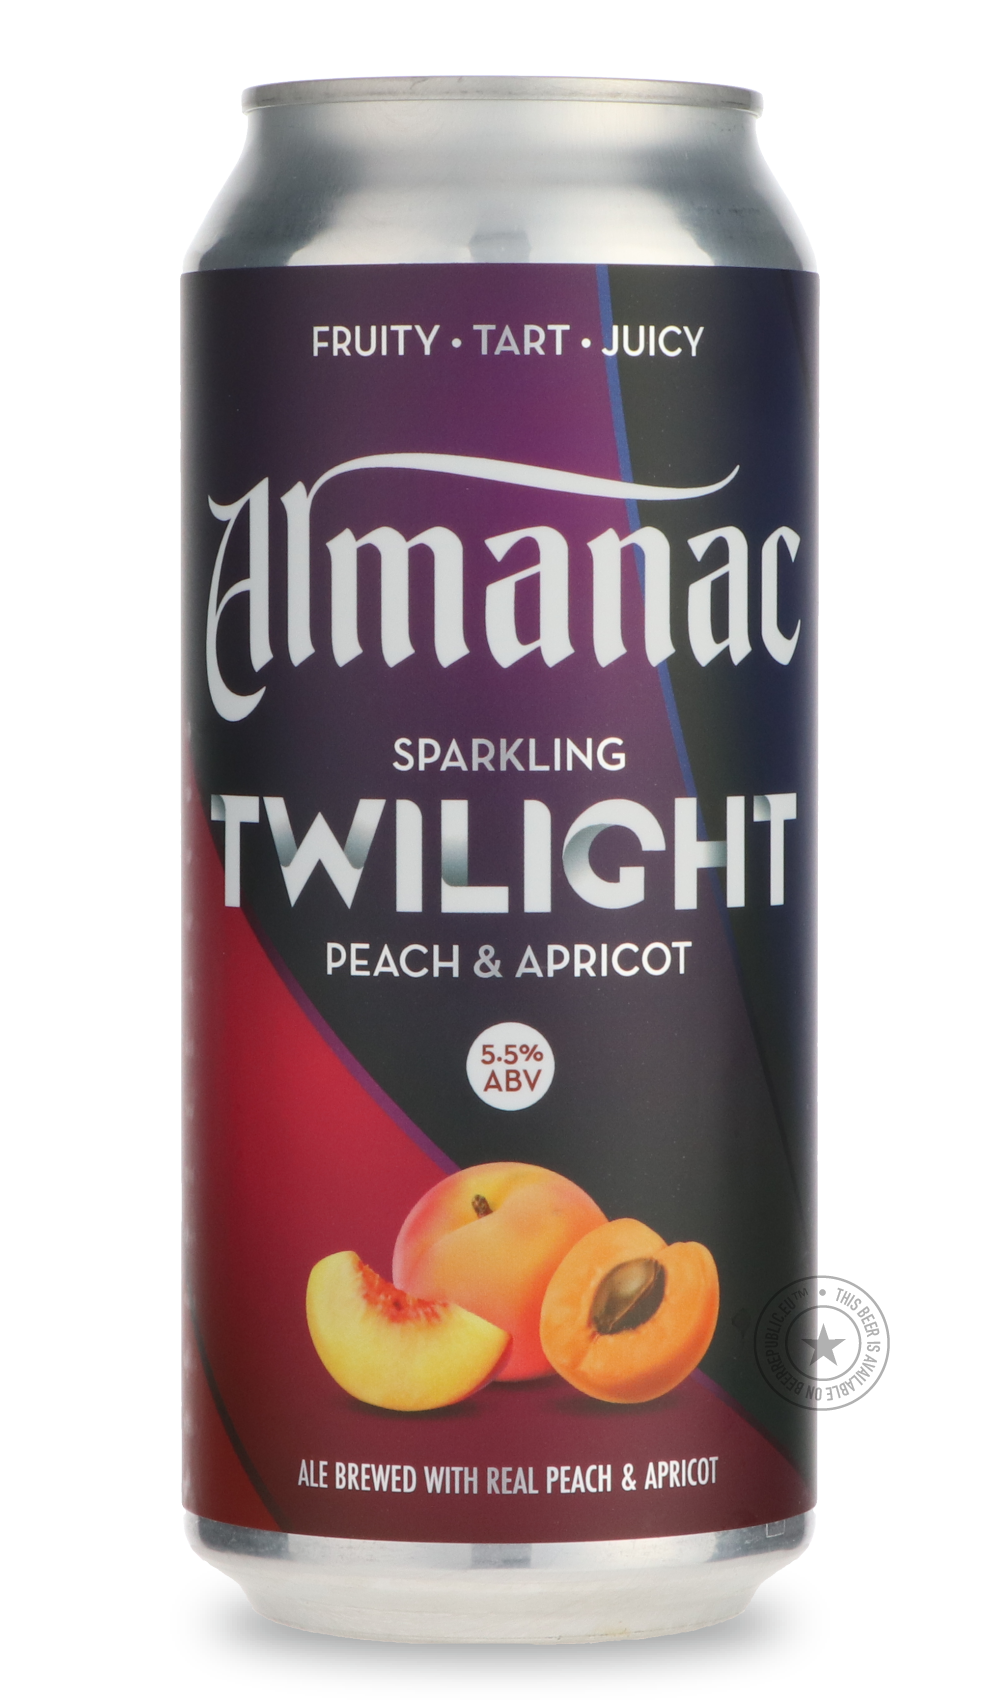 -Almanac- Twilight Sparkling Ale (Peach & Apricot)-Sour / Wild & Fruity- Only @ Beer Republic - The best online beer store for American & Canadian craft beer - Buy beer online from the USA and Canada - Bier online kopen - Amerikaans bier kopen - Craft beer store - Craft beer kopen - Amerikanisch bier kaufen - Bier online kaufen - Acheter biere online - IPA - Stout - Porter - New England IPA - Hazy IPA - Imperial Stout - Barrel Aged - Barrel Aged Imperial Stout - Brown - Dark beer - Blond - Blonde - Pilsner 